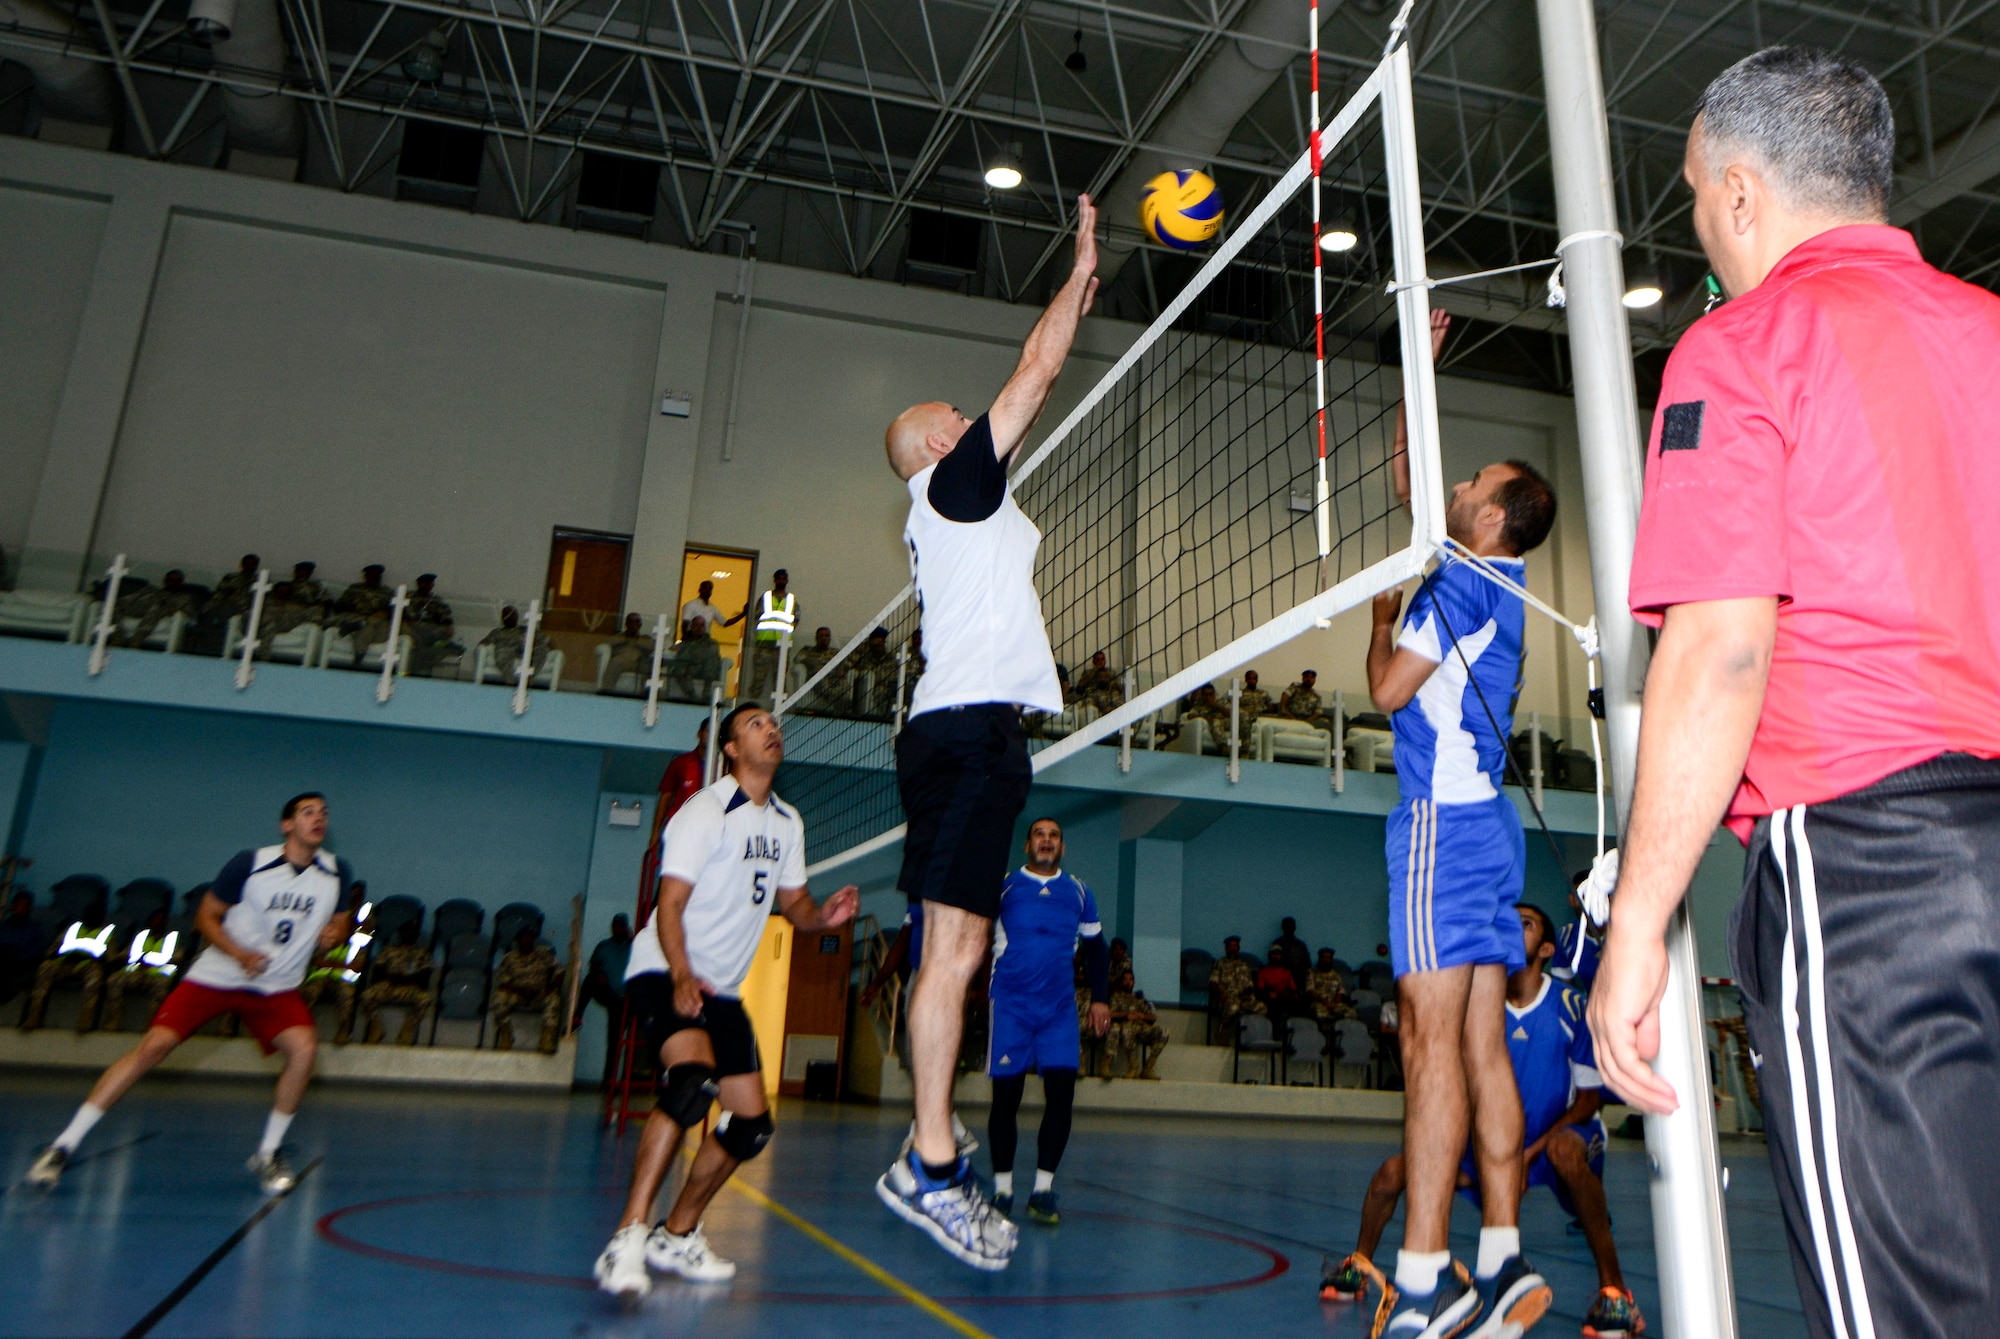 Maj. Matthew Bailey, 8th Expeditionary Air Mobility Squadron aerial port flight commander, blocks the ball during a volleyball tournament June 2, 2016, at Al Udeid Air Base, Qatar. The Qatar Emiri Air Force hosted a match for their squadrons, AUAB Airmen and Camp As Sayliyah personnel to strengthen the partnership and build friendships between the service members. (U.S. Air Force photo/Senior Airman Janelle Patiño/Released)